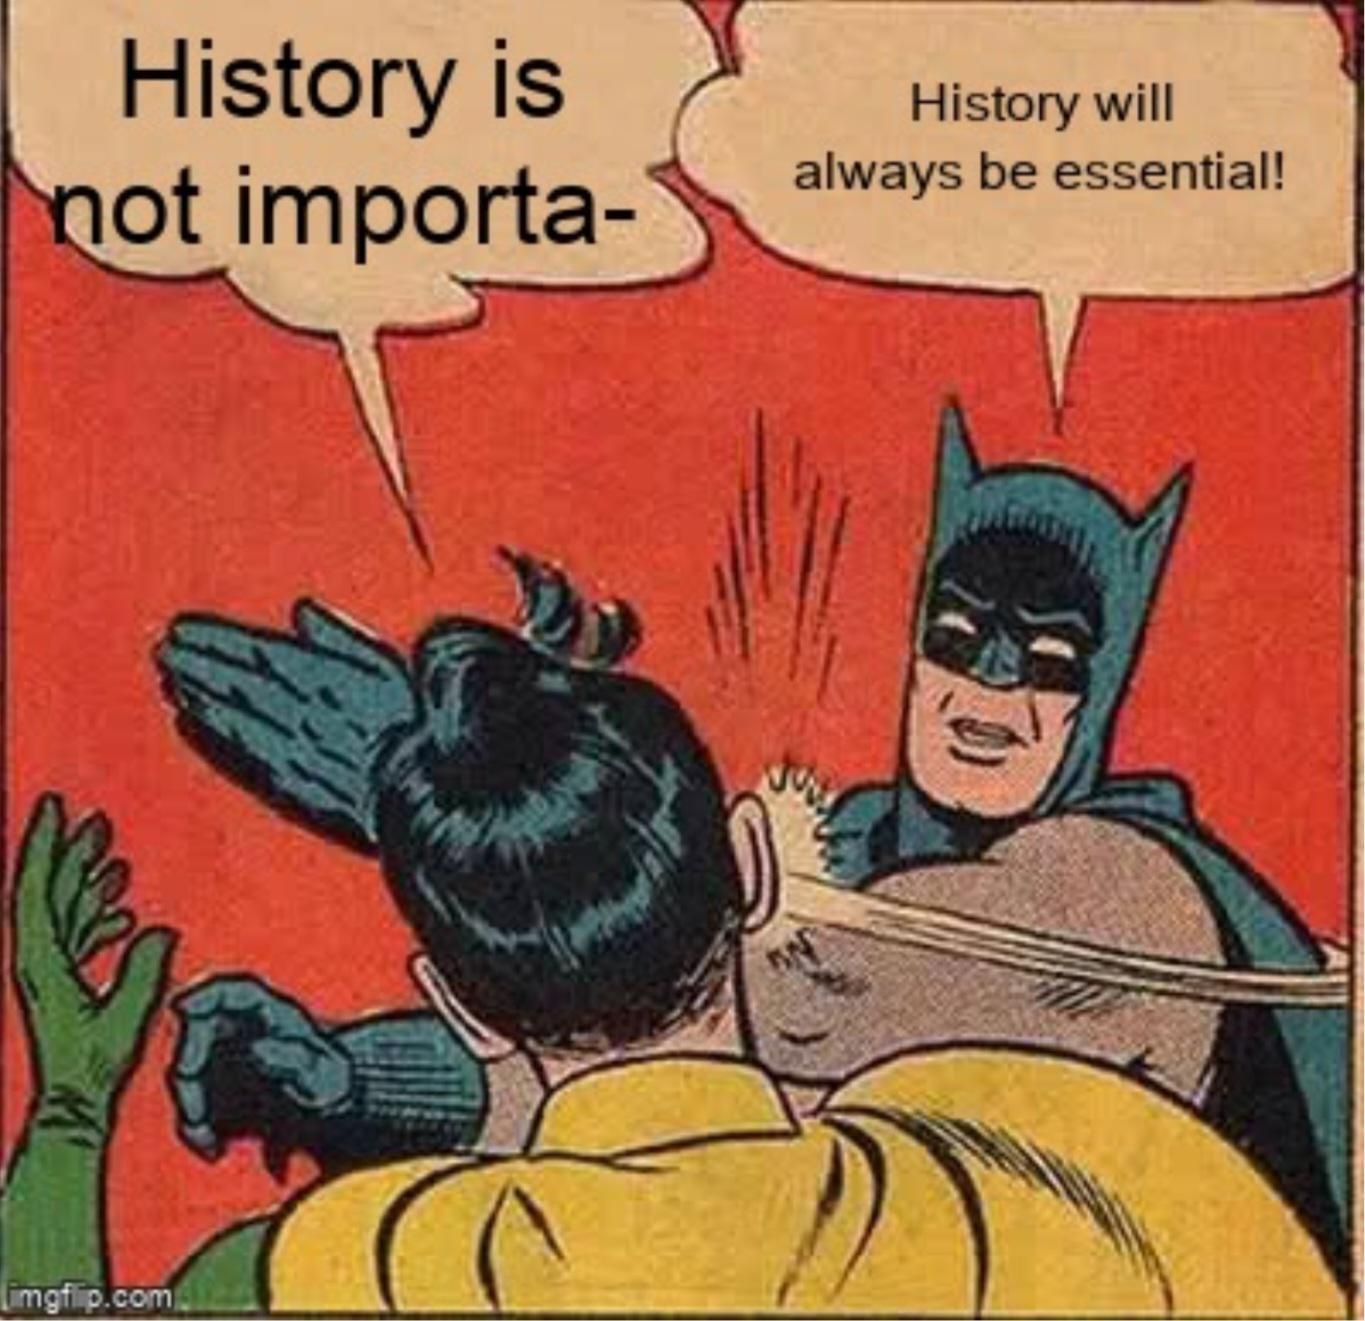 How I feel as a history student: